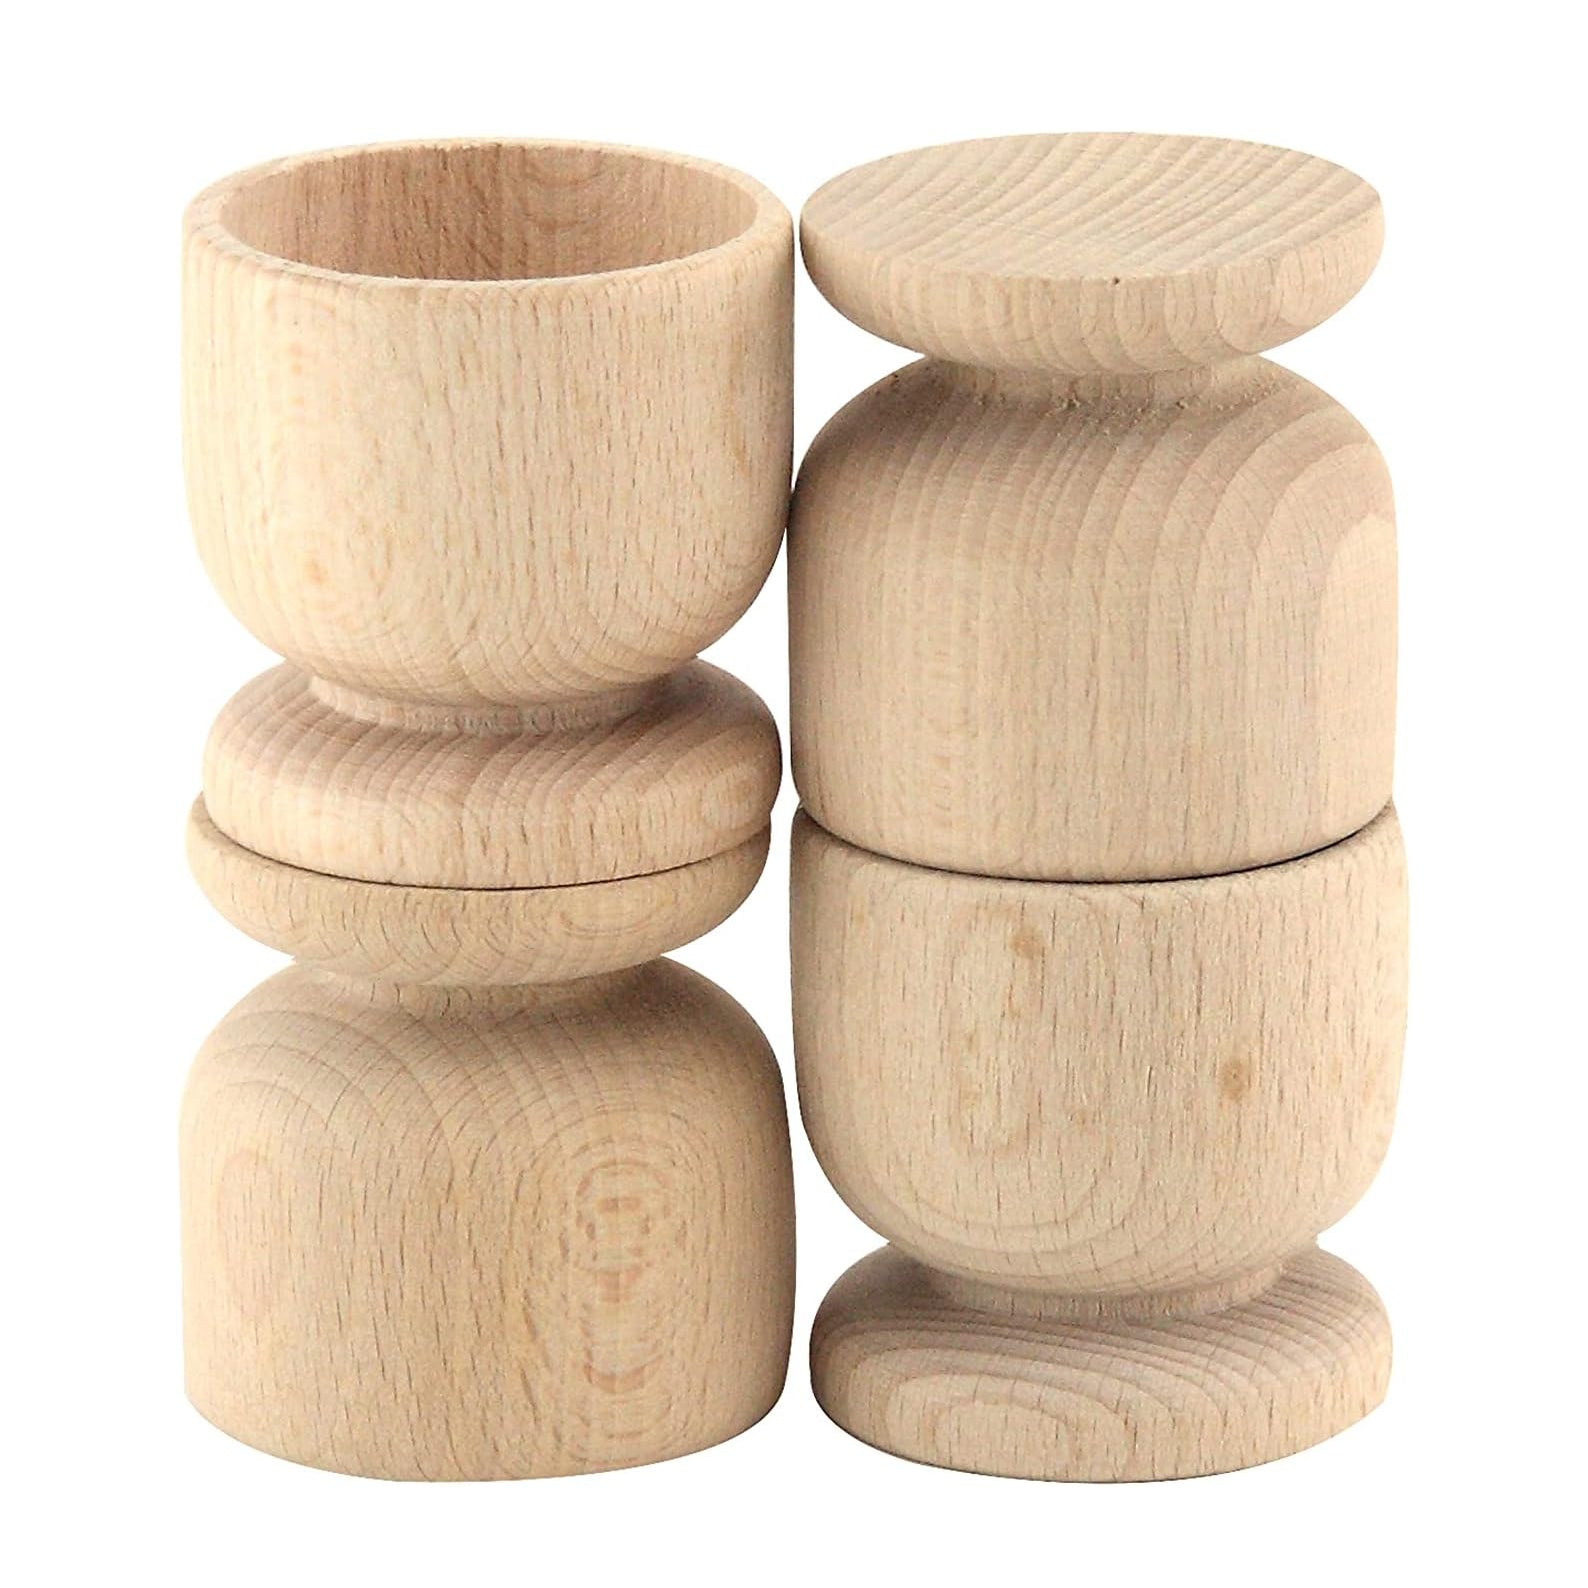 Wooden Egg Cups 4 Pack